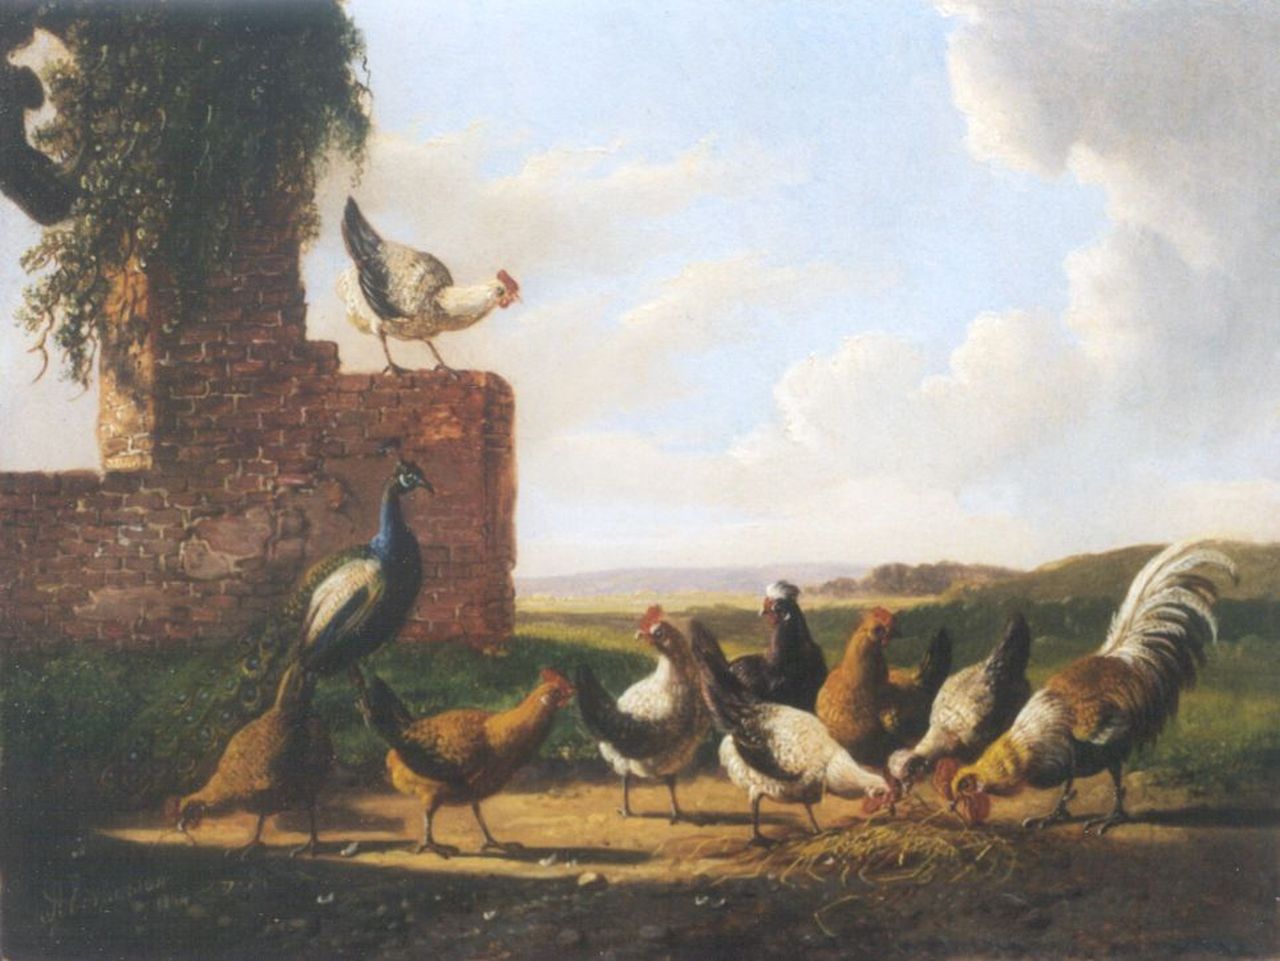 Verhoesen A.  | Albertus Verhoesen, Poultry and a peacock by a ruin, oil on panel 18.1 x 23.8 cm, signed l.l. and dated 1874